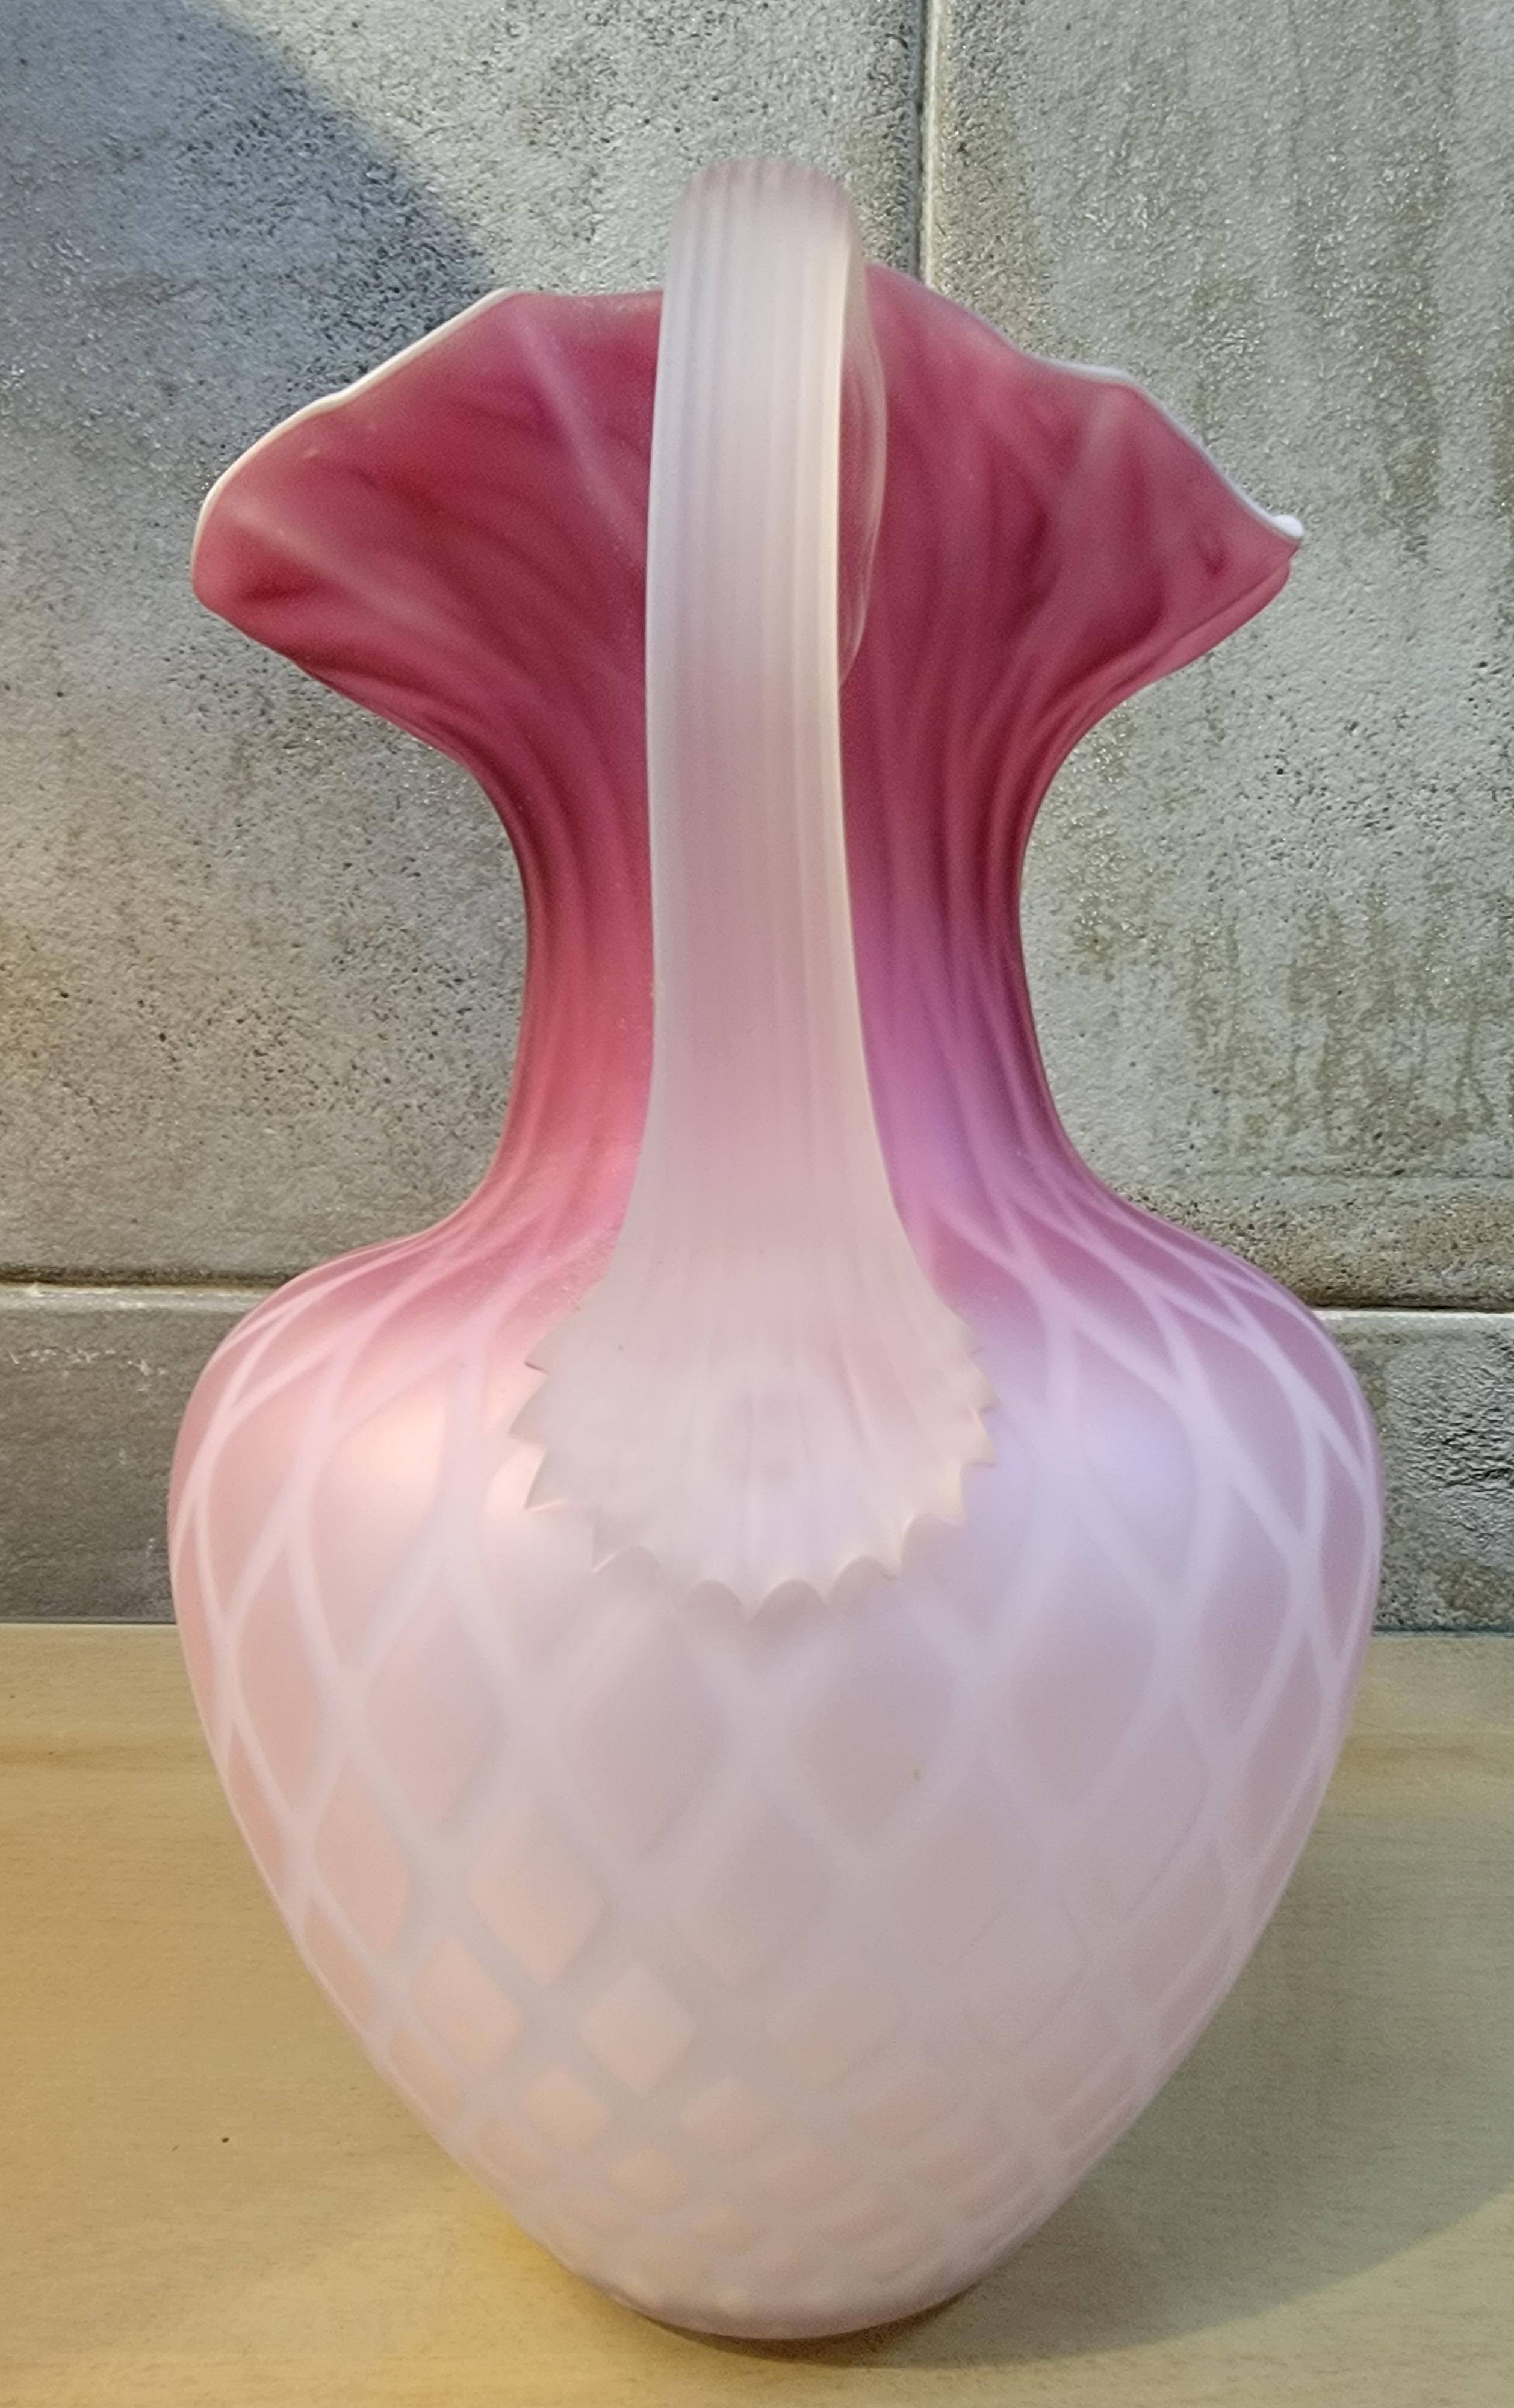 A late 19th century cased glass pitcher. Circa. 1890. Beautiful pink and white diamond quilted pattern. Excellent original condition.